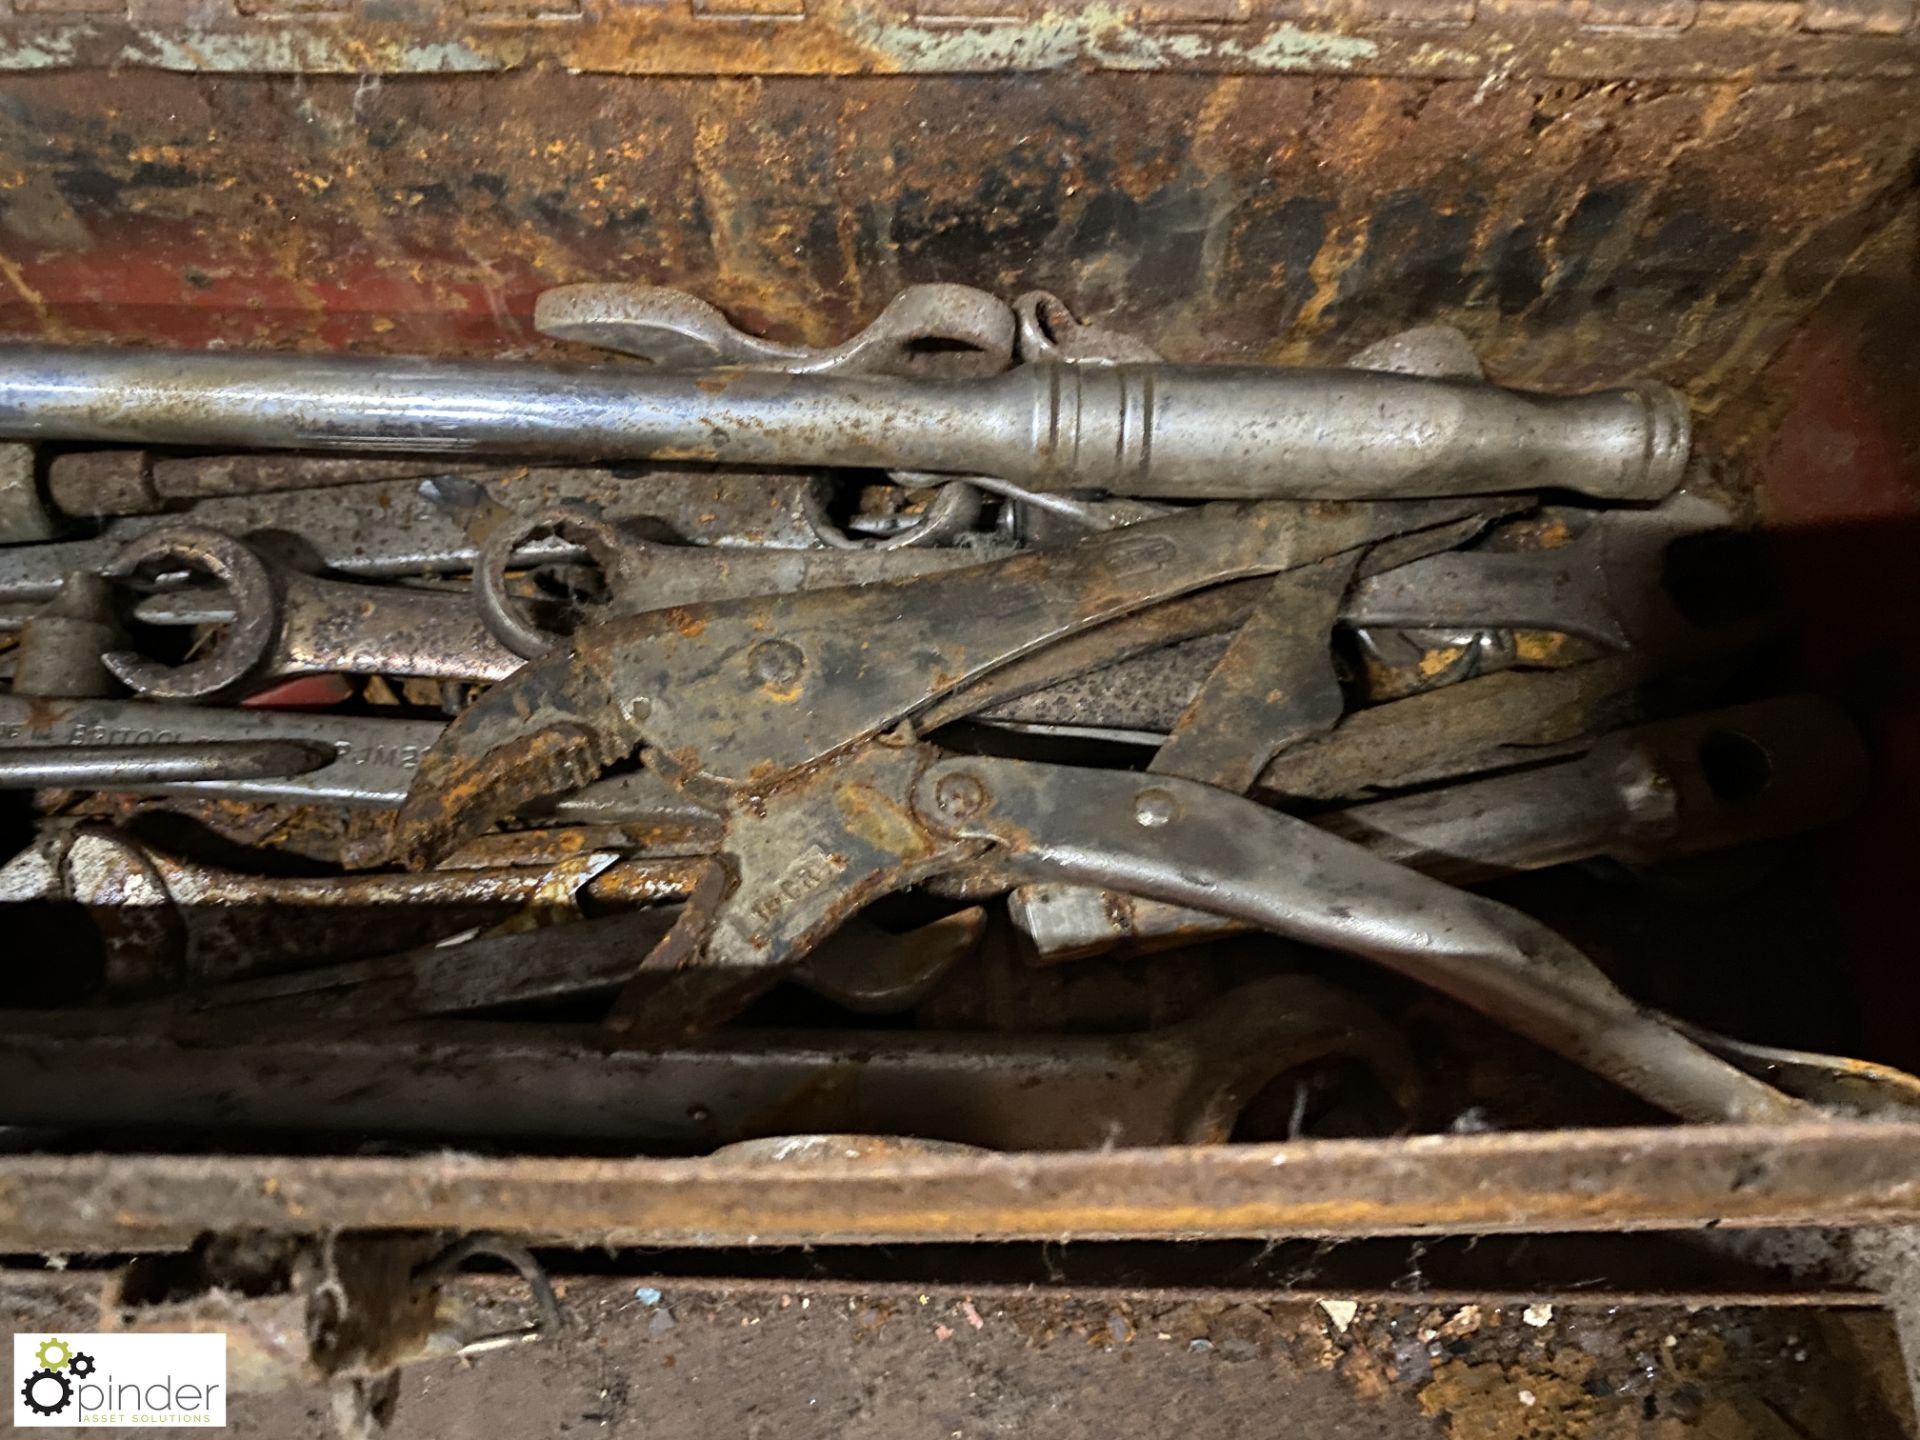 2 steel Tool Boxes and Contents, including socket wrenches, mole grips, spanners - Image 6 of 7